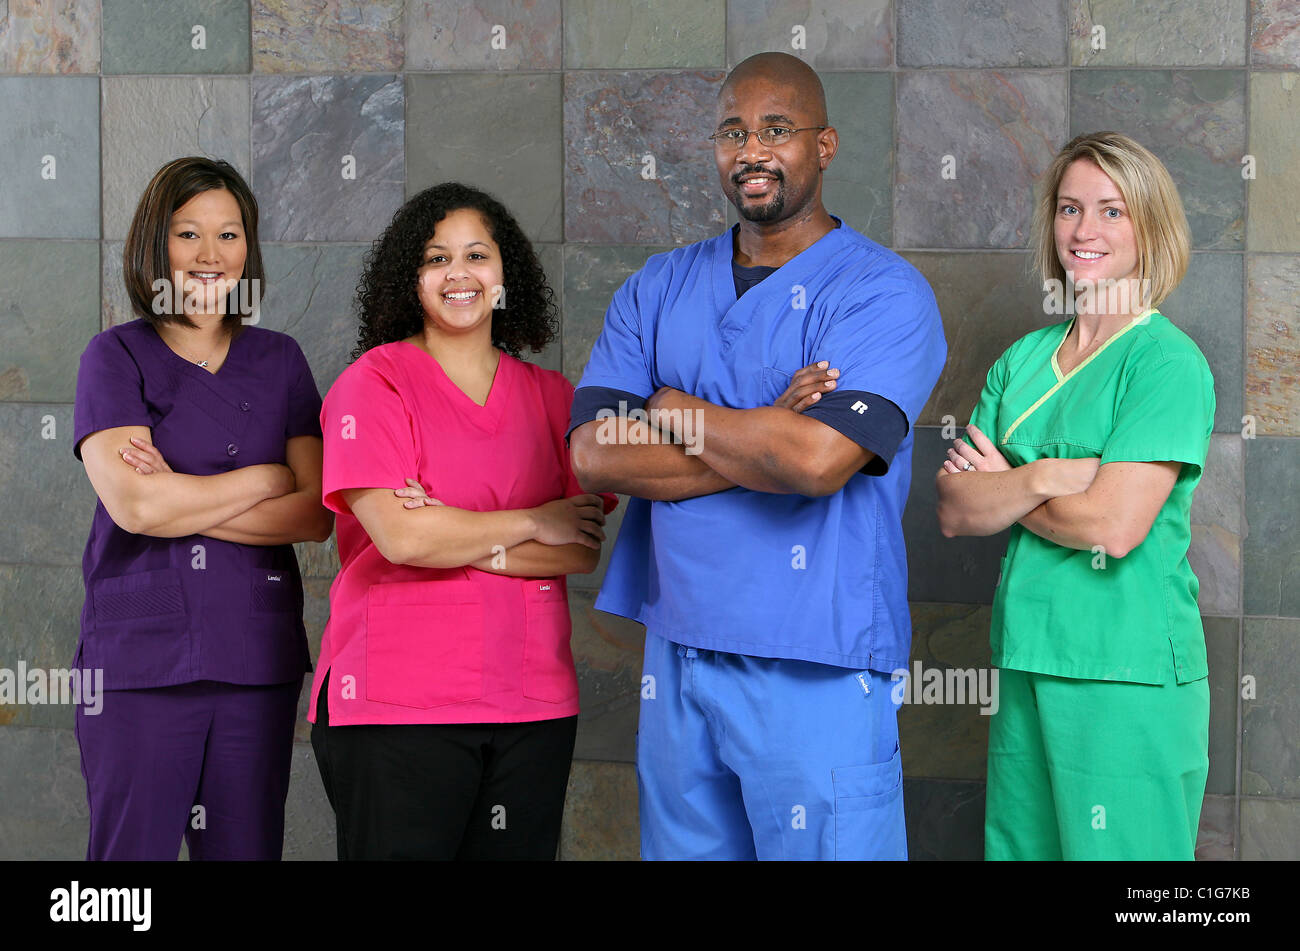 Nurses in a hospital. Various ethnic backgrounds. Healthcare related photo. Stock Photo